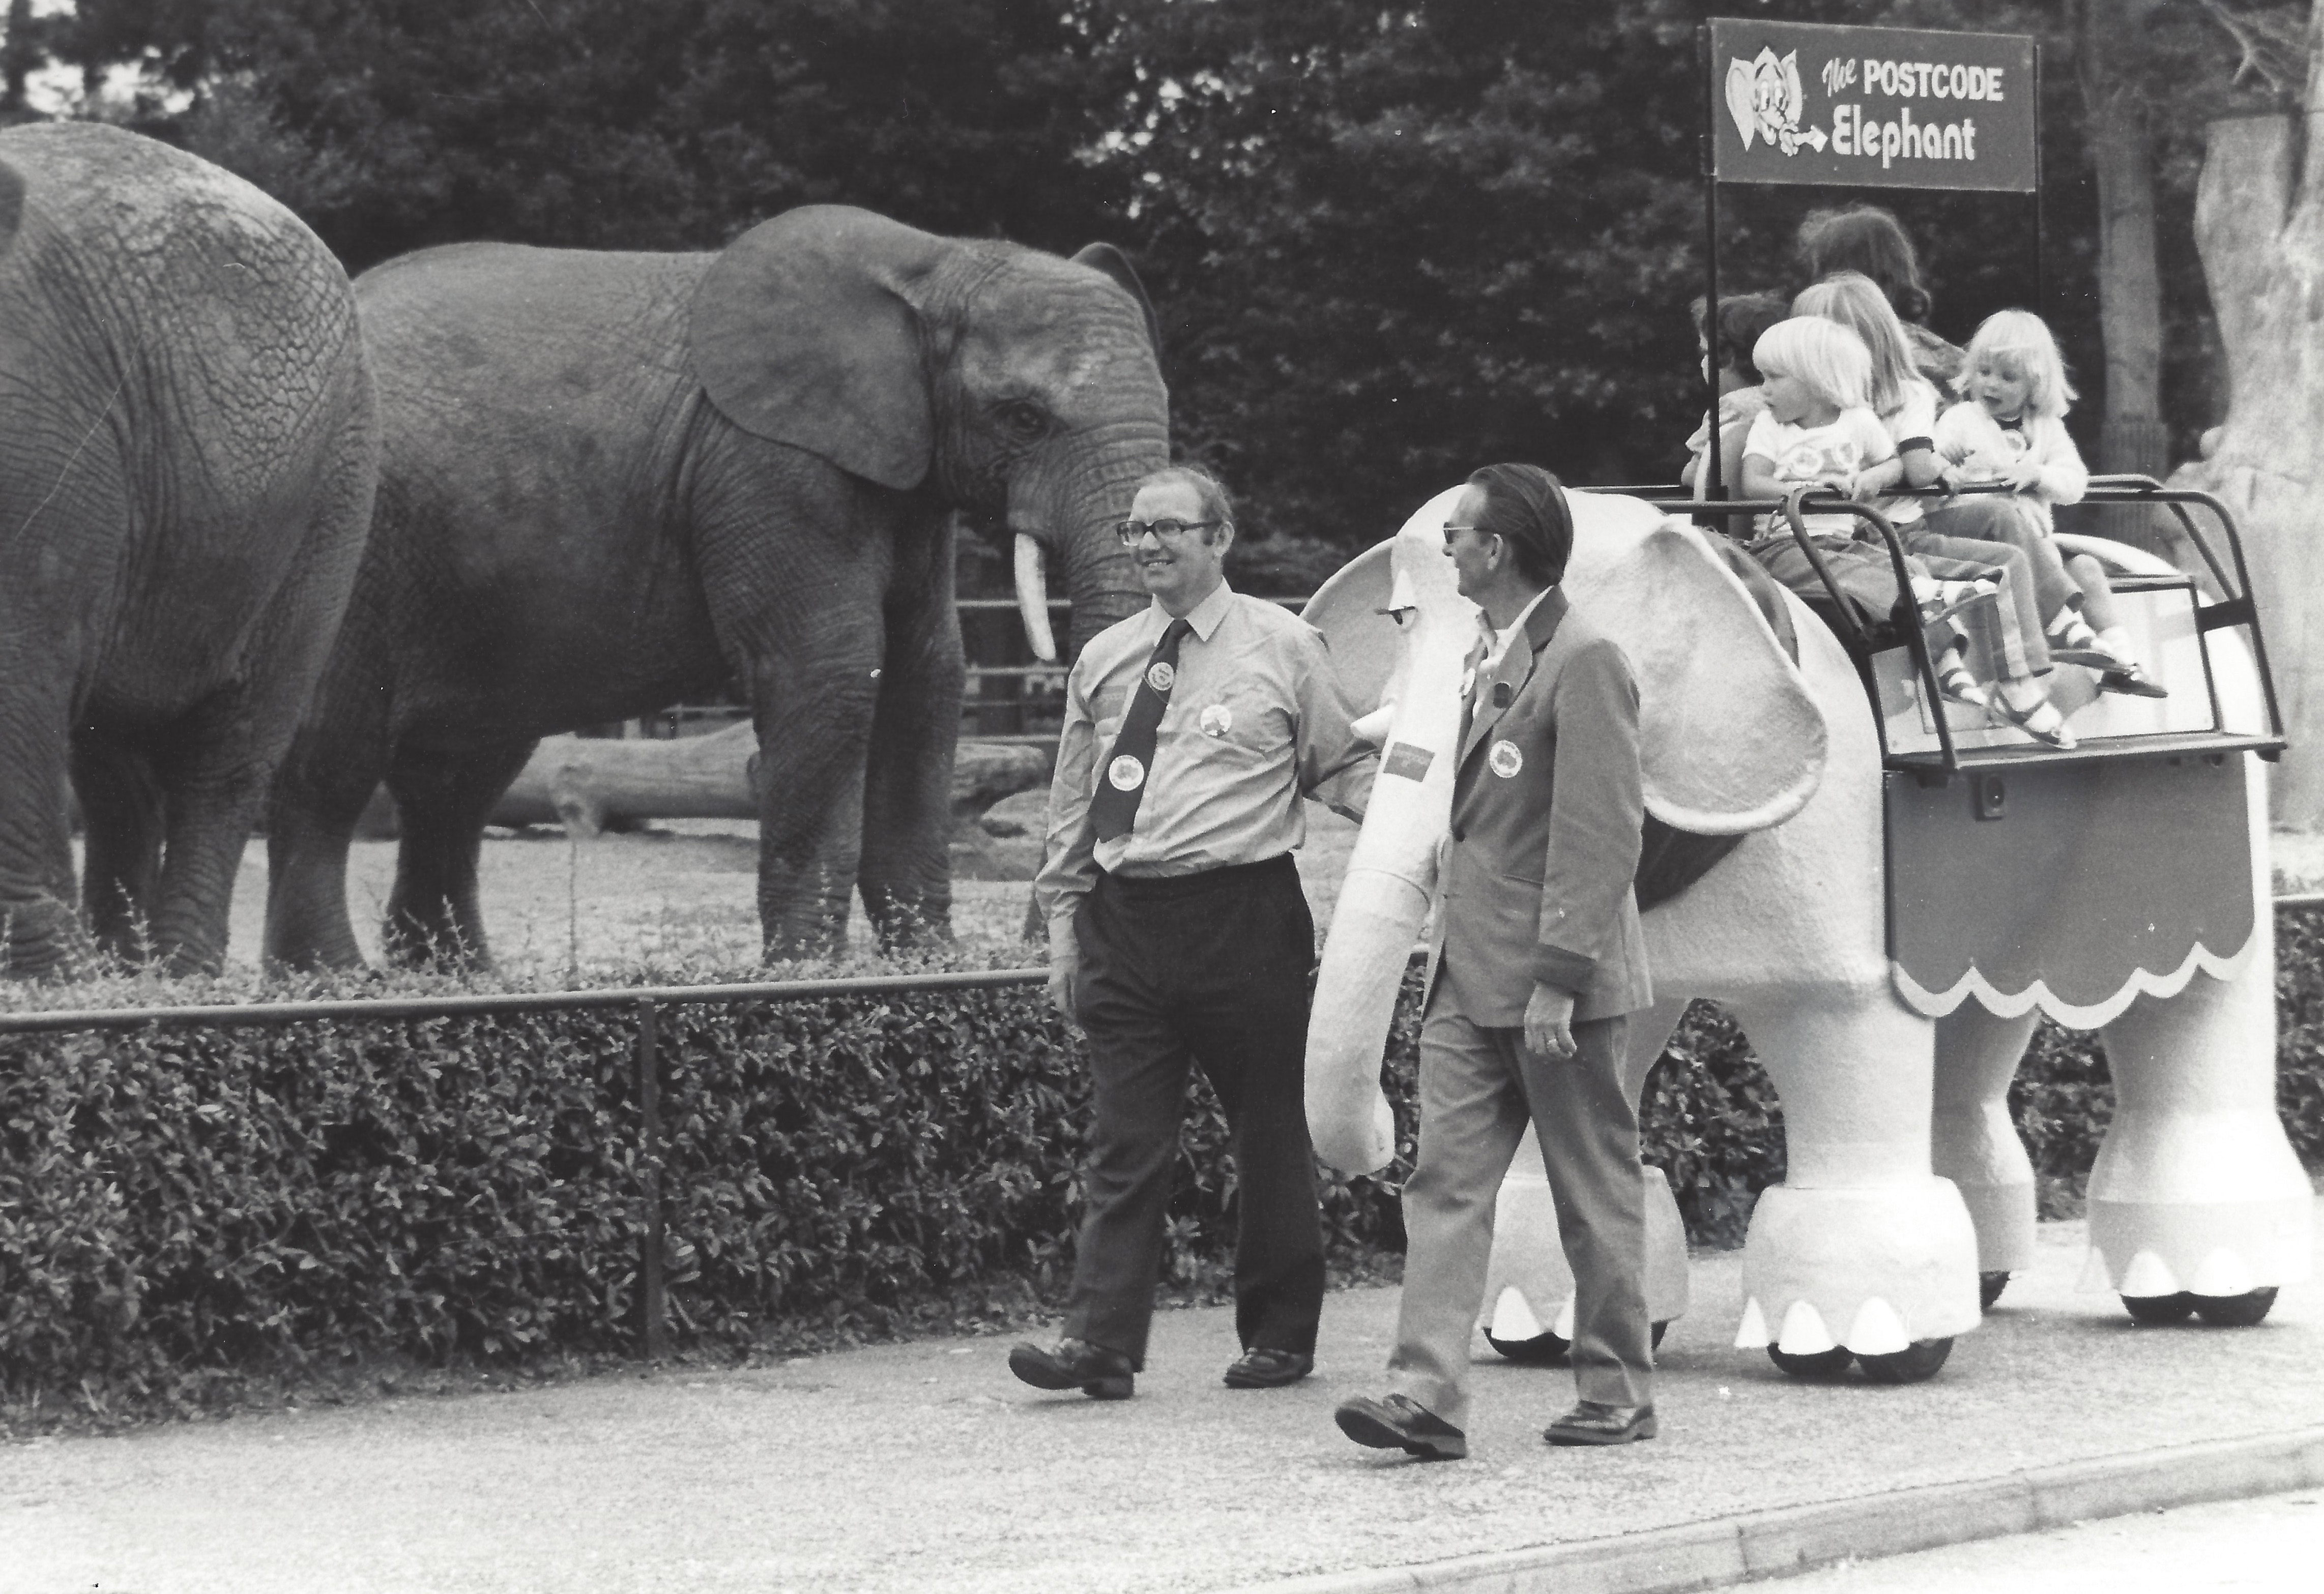 Poco goes to Whipsnade Zoo in 1981